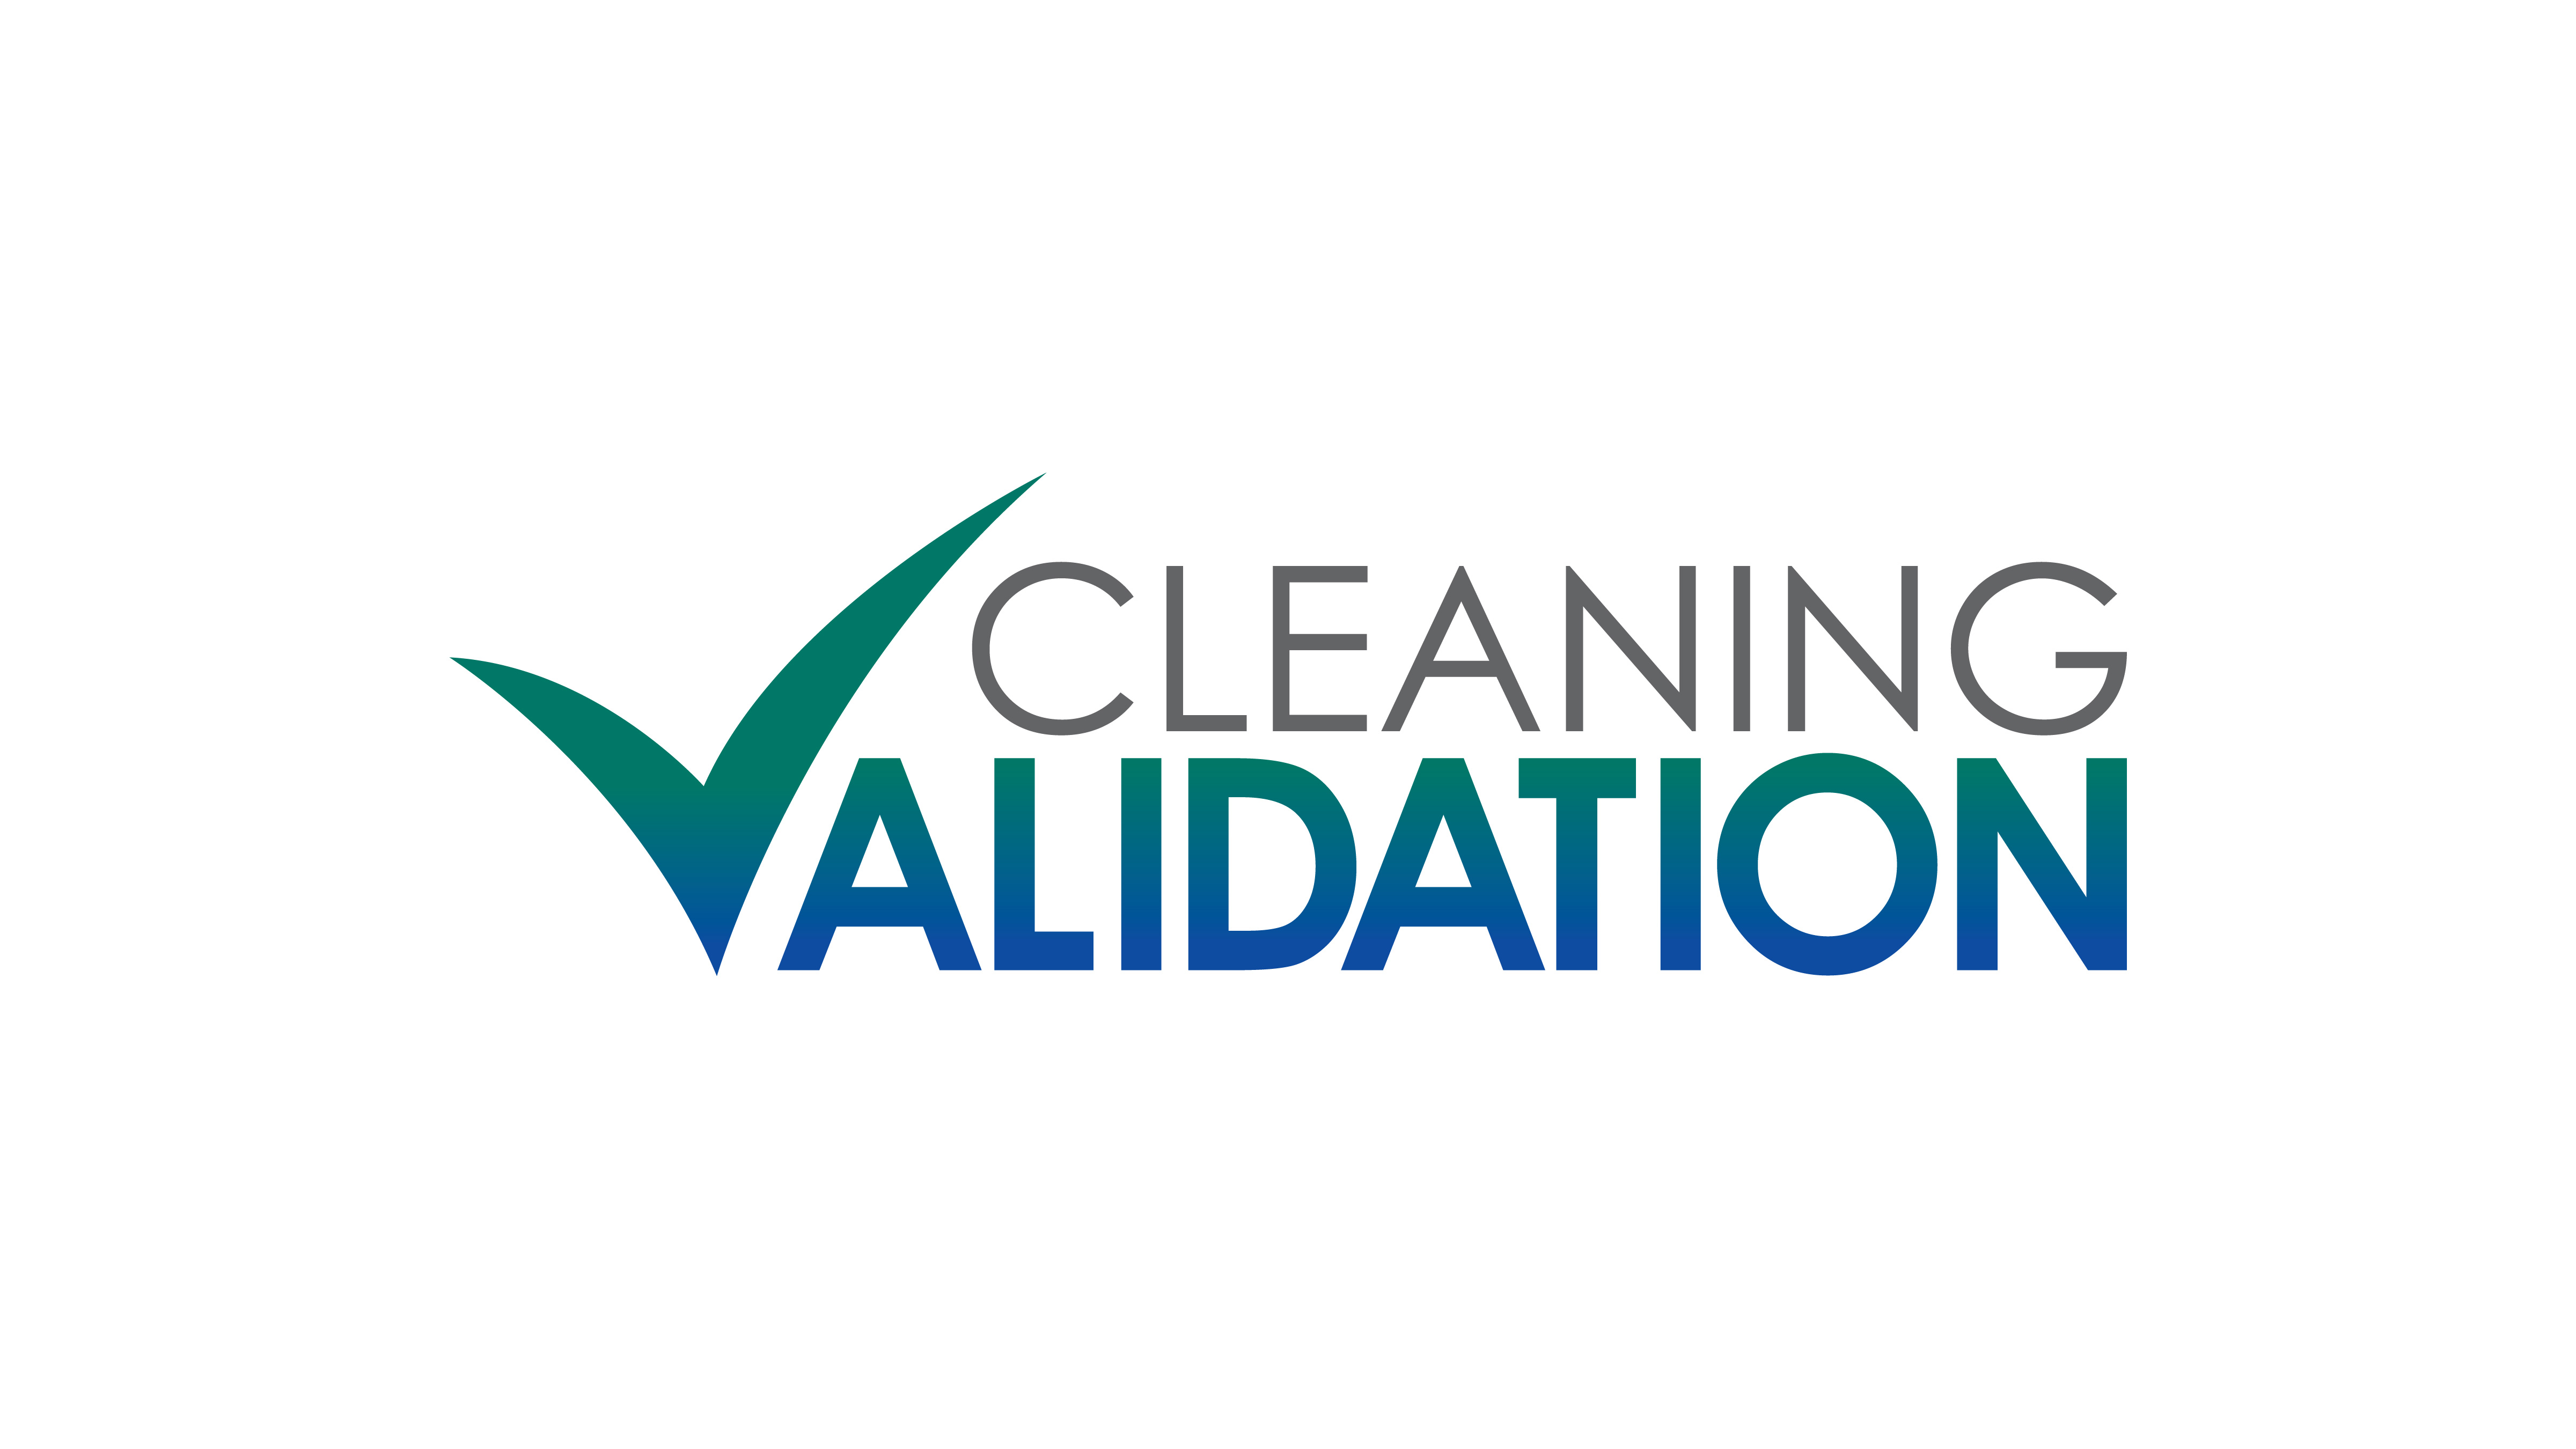 2nd Annual Cleaning Validation 2022 – A Practical Approach, Mumbai, Maharashtra, India